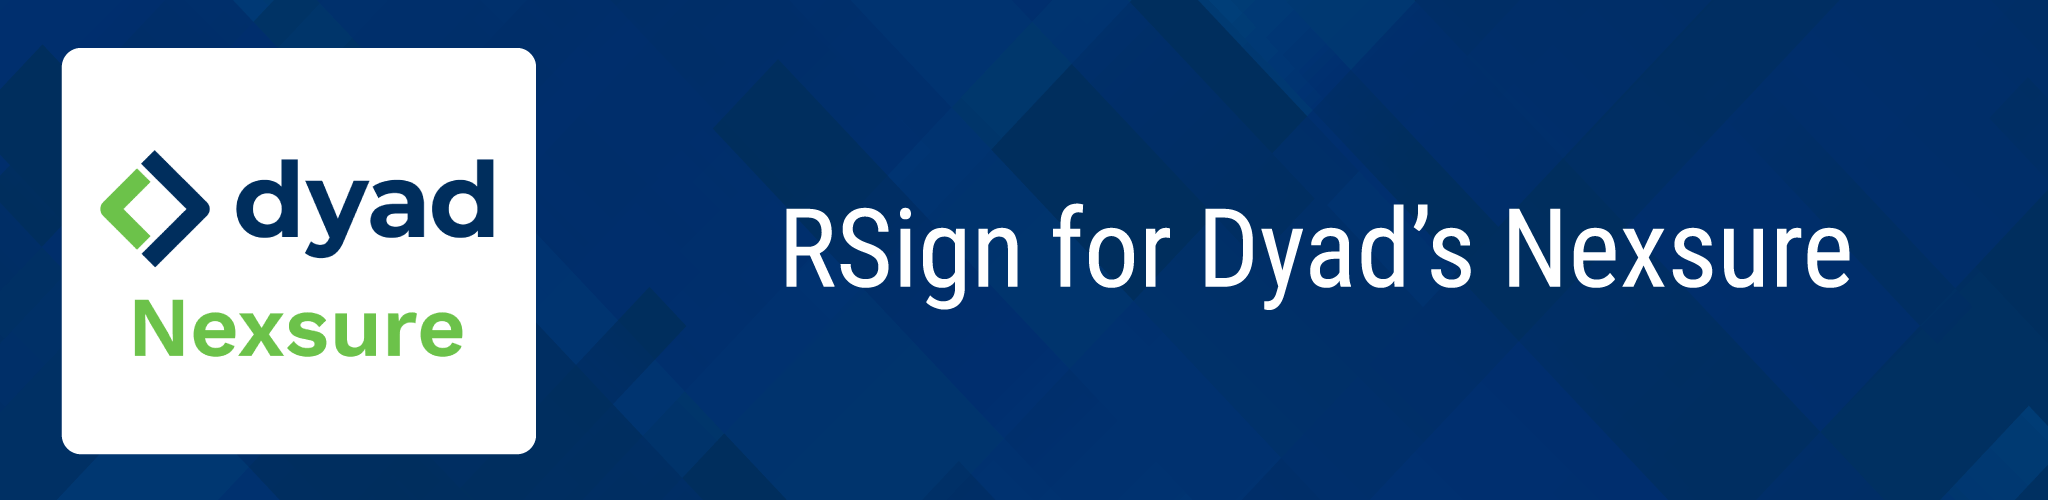 RSign for Dyad’s Nexsure